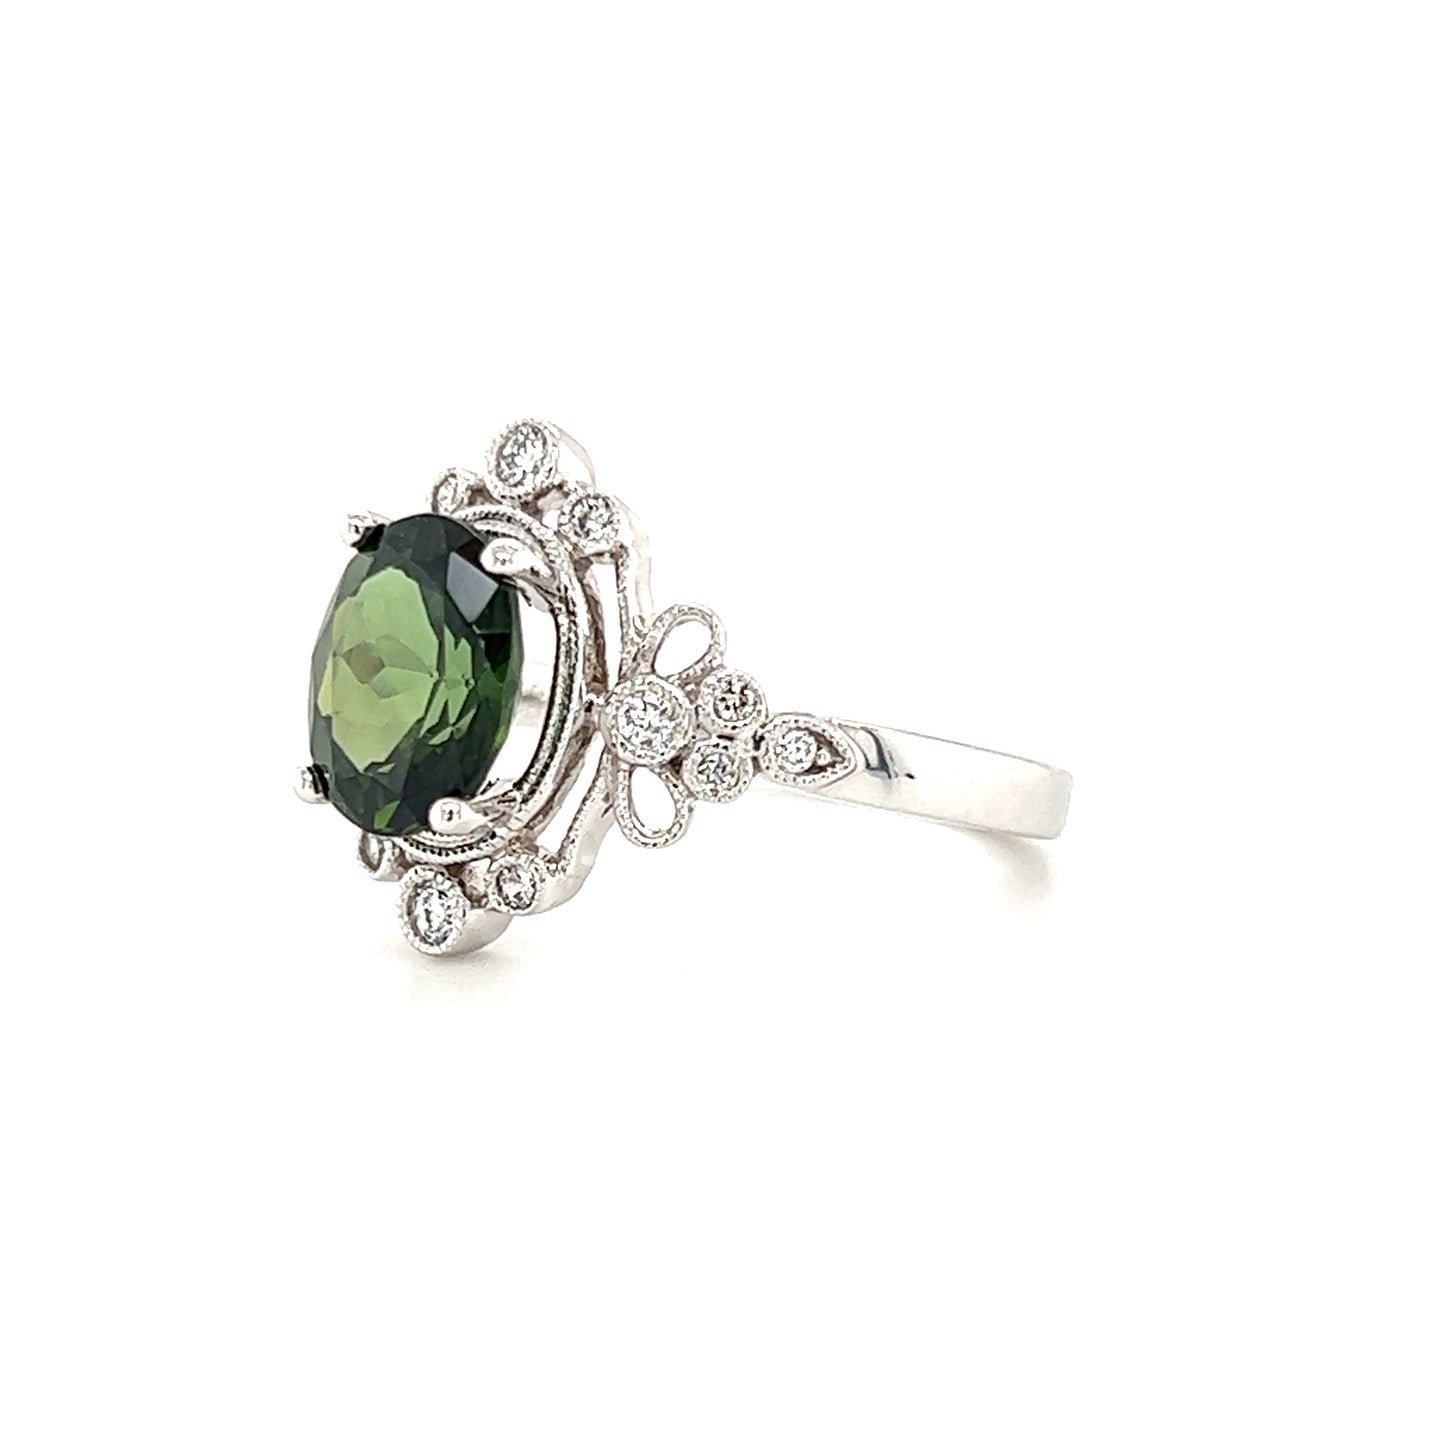 Vintage Green Tourmaline Ring with Side Diamonds in 14K White Gold Left Side View